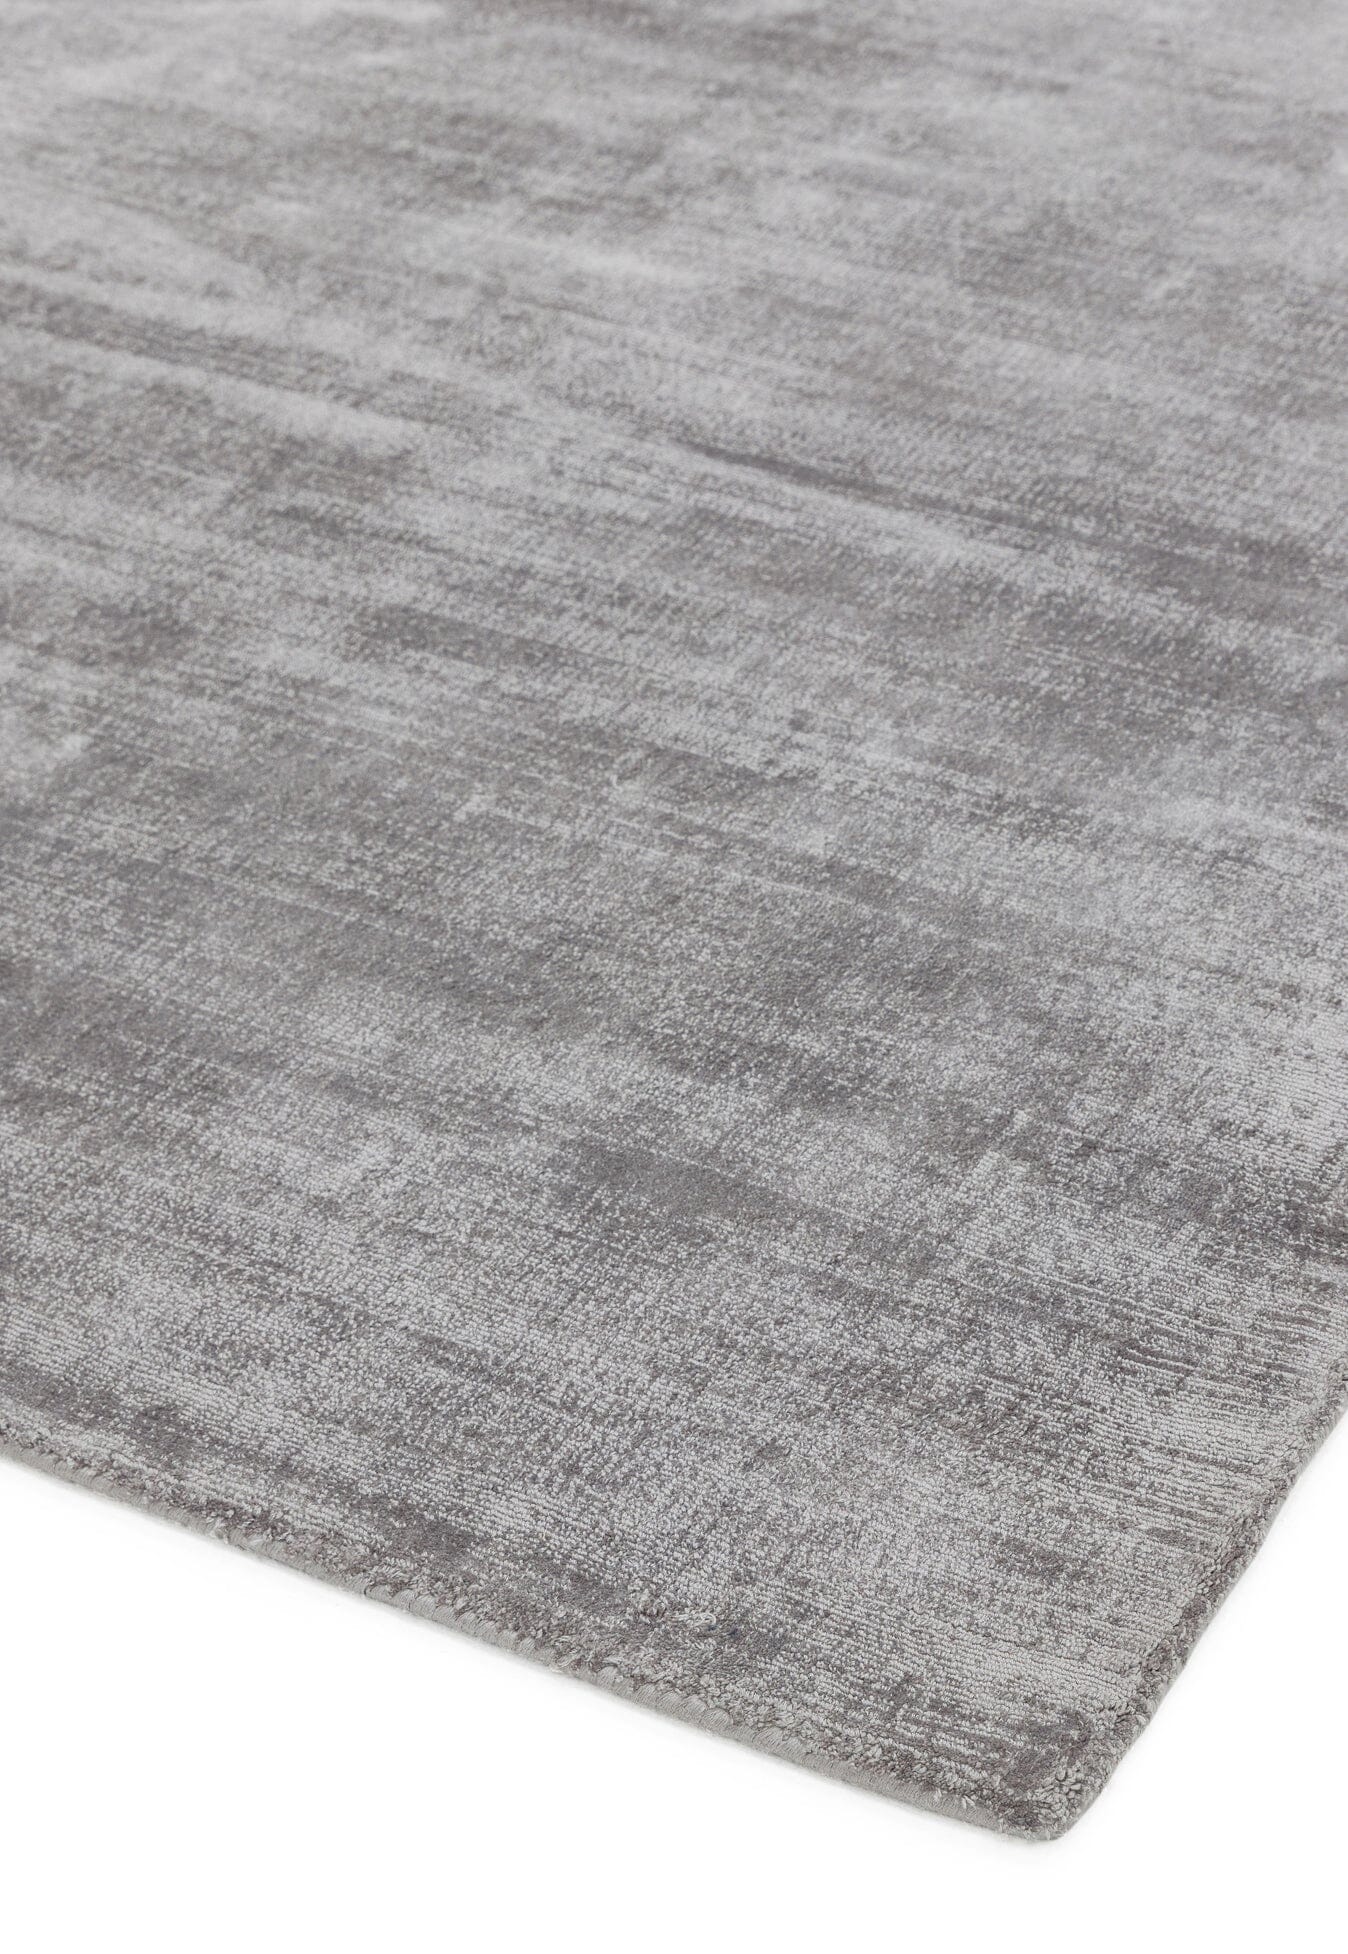 Asiatic Carpets Blade Hand Woven Rug Silver - 200 x 290cm